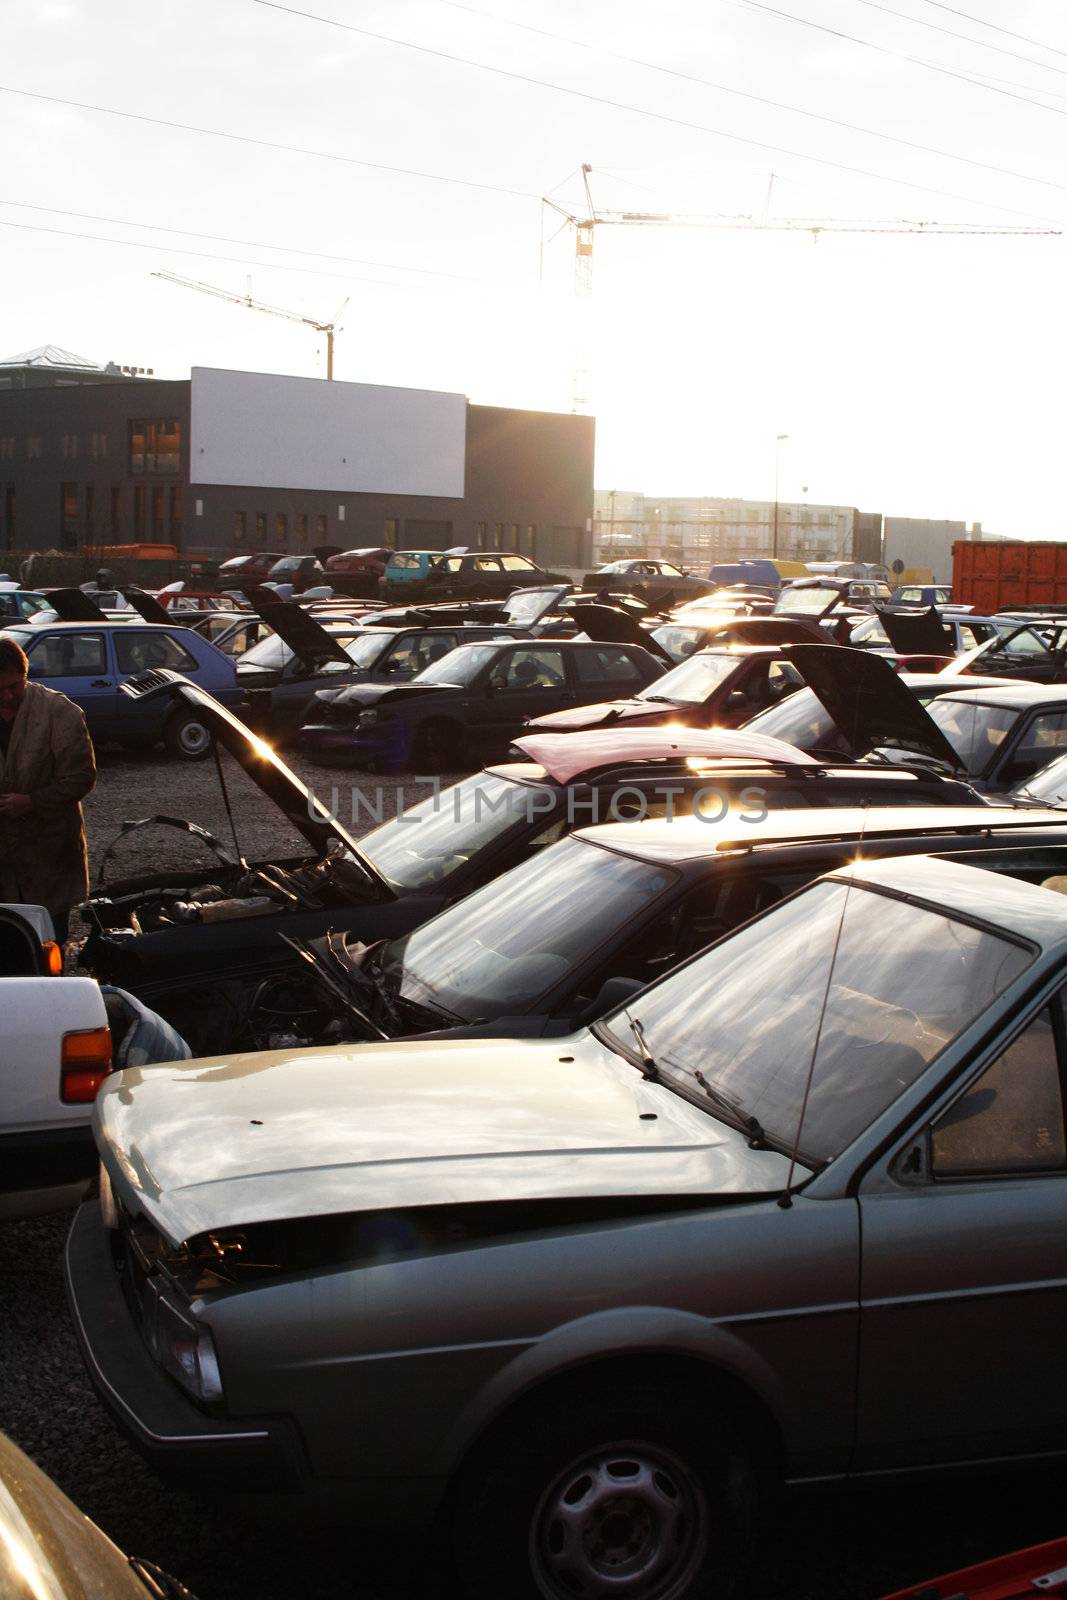 scrap yard for recycling cars by photochecker